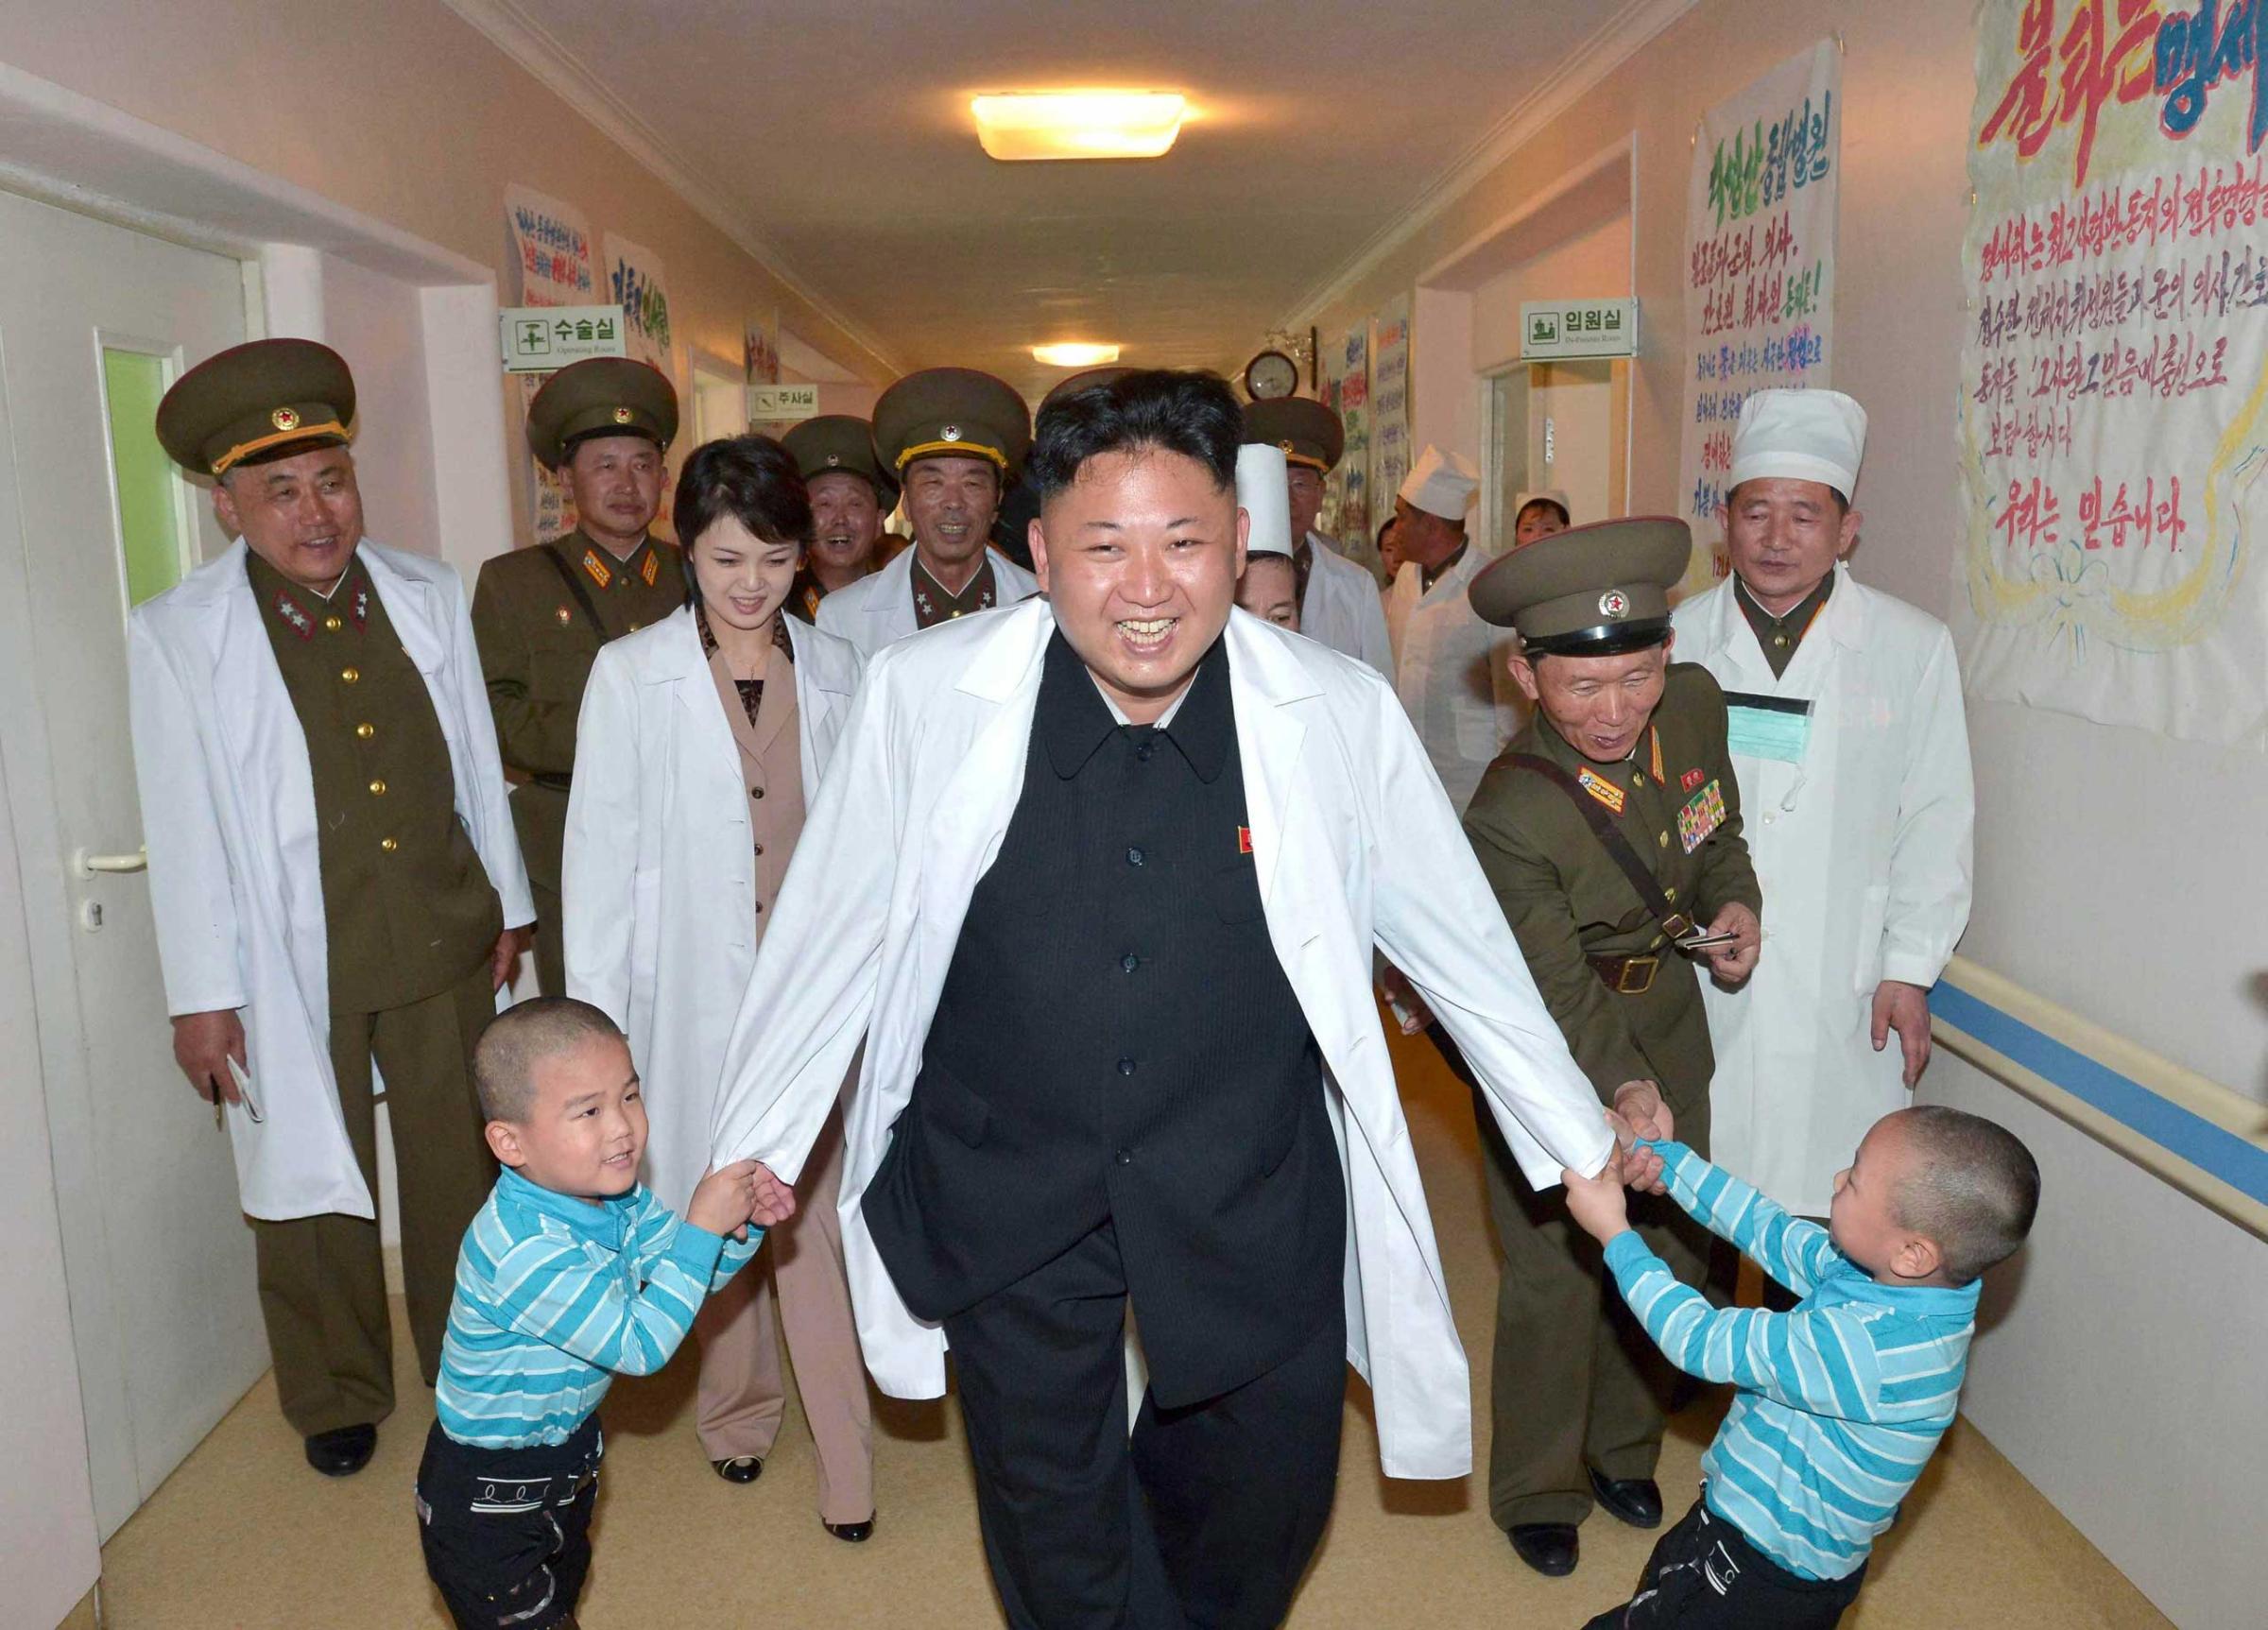 North Korean leader Kim Jong un plays with children during a visit to the Taesongsan General Hospital in this undated photo released by North Korea's KCNA agency in Pyongyang